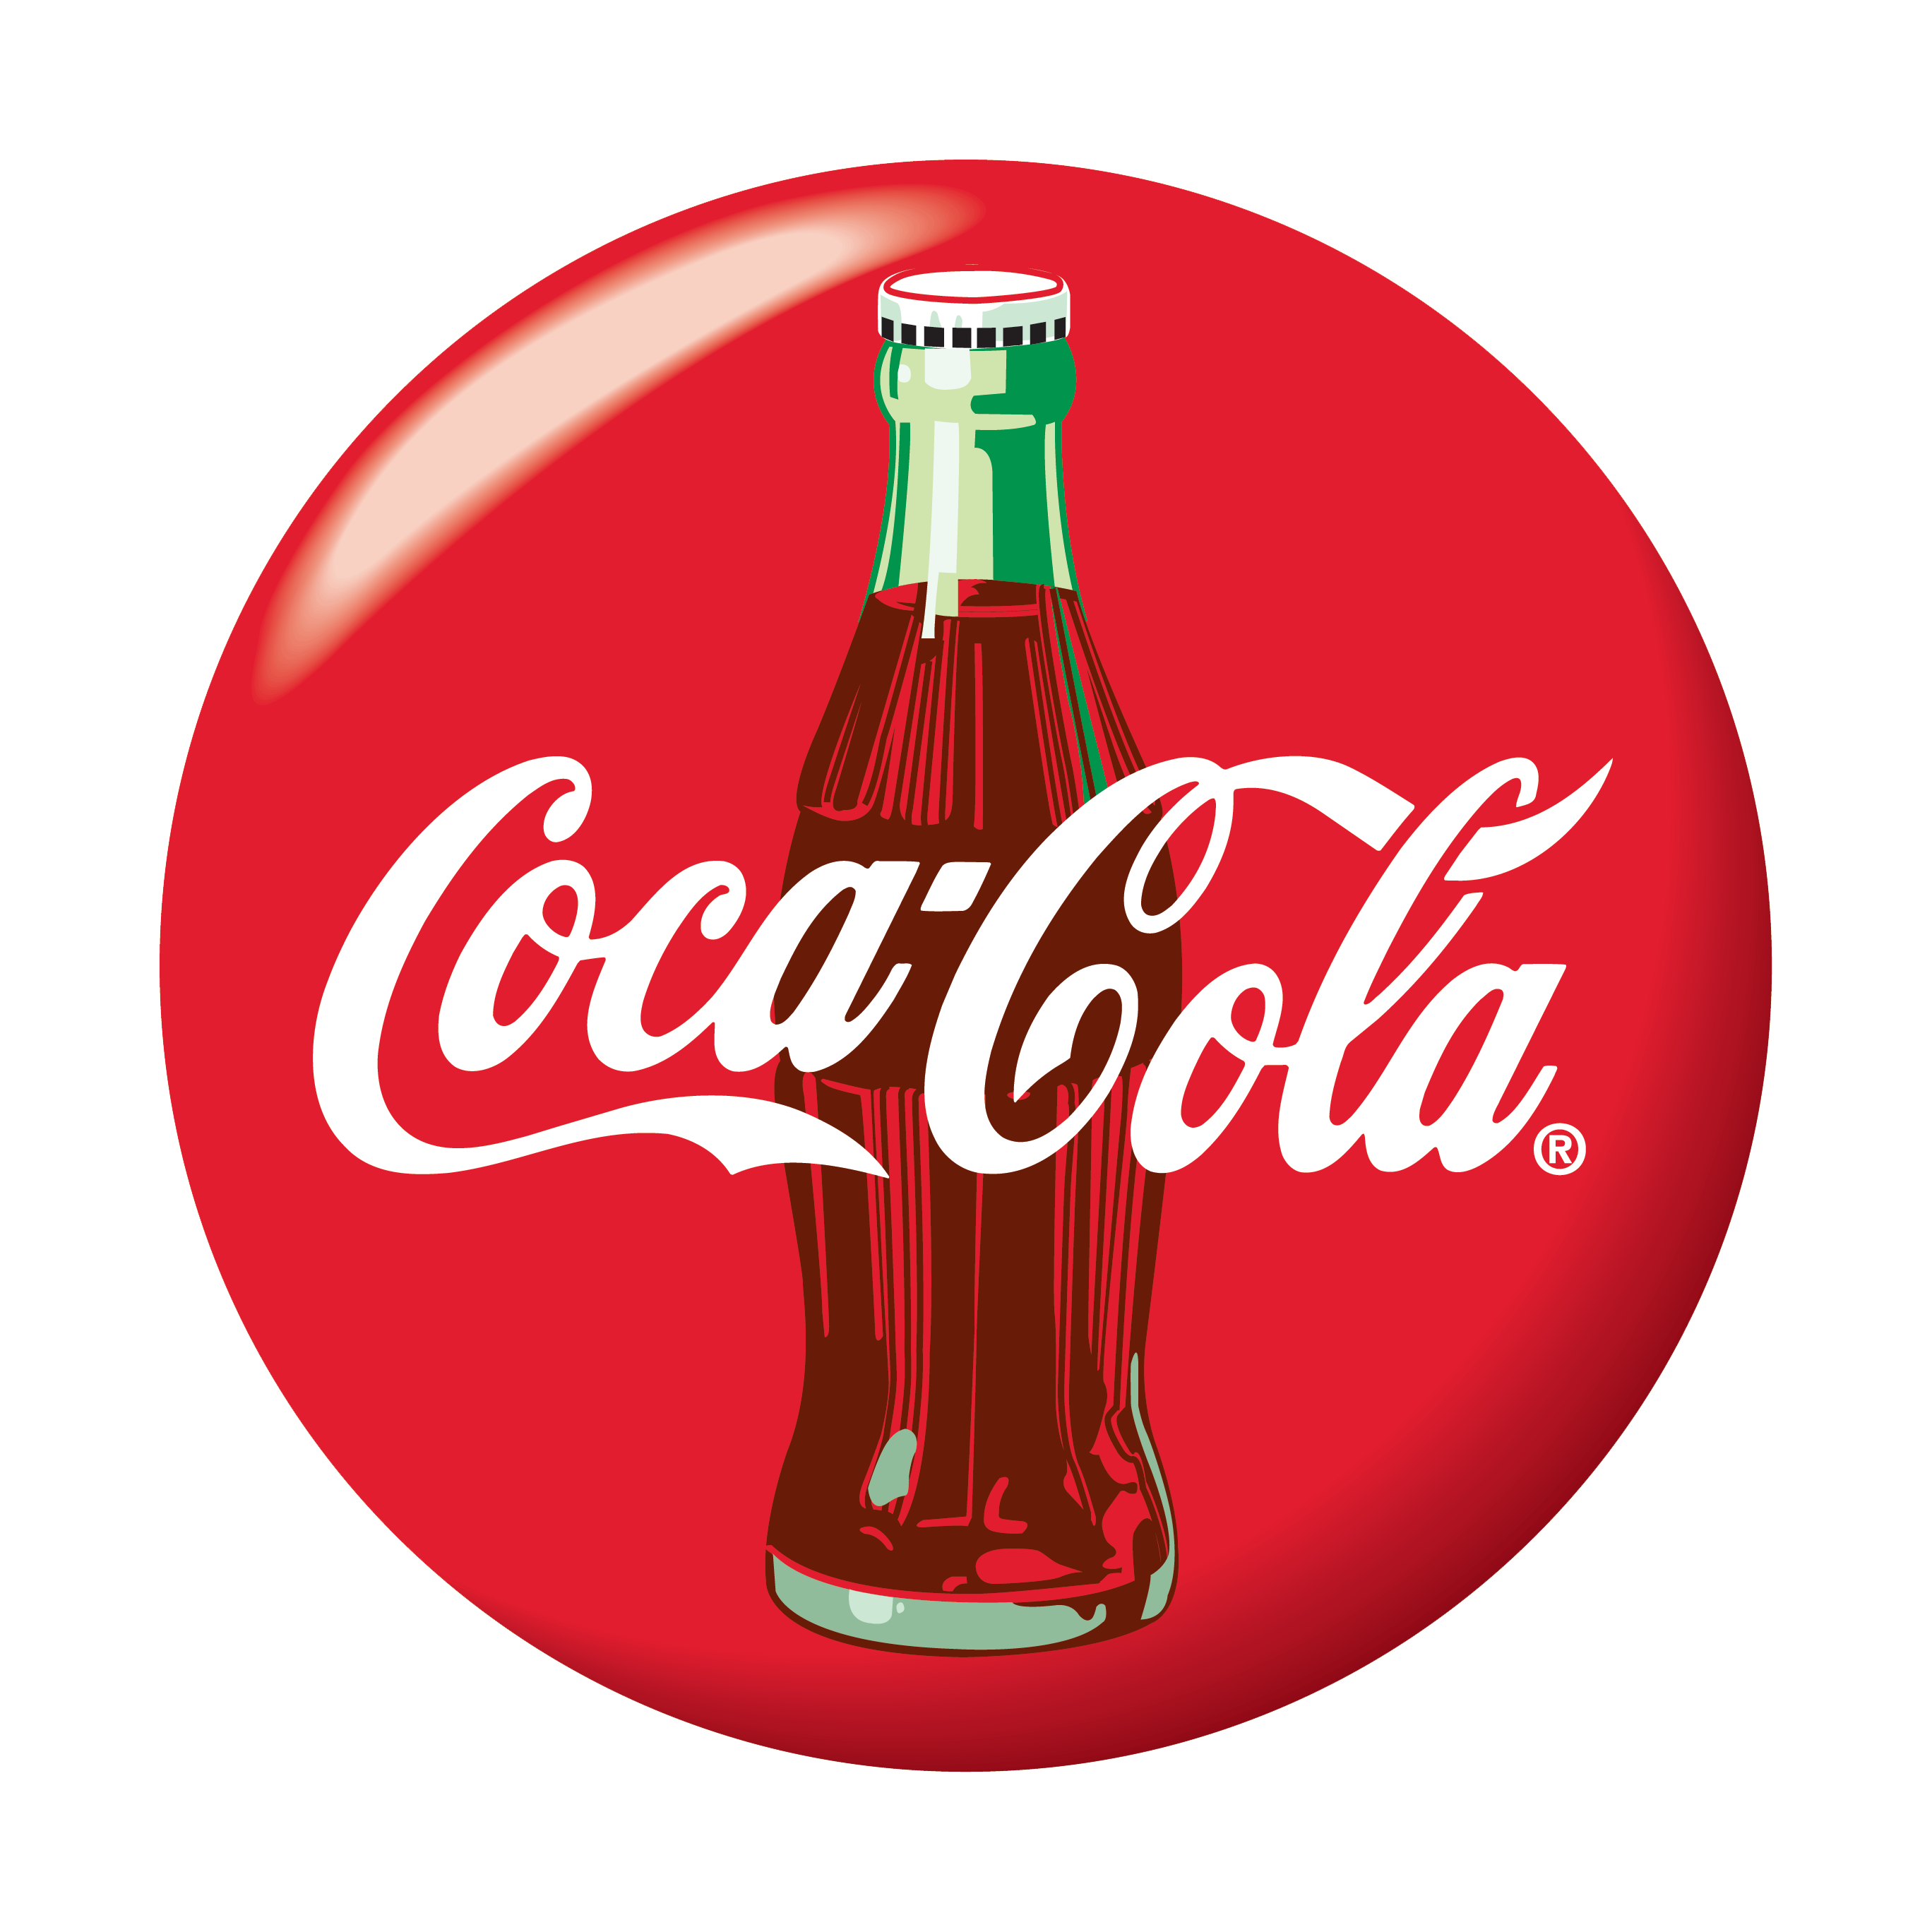 Download Coca Cola Logo PNG Image for Free.